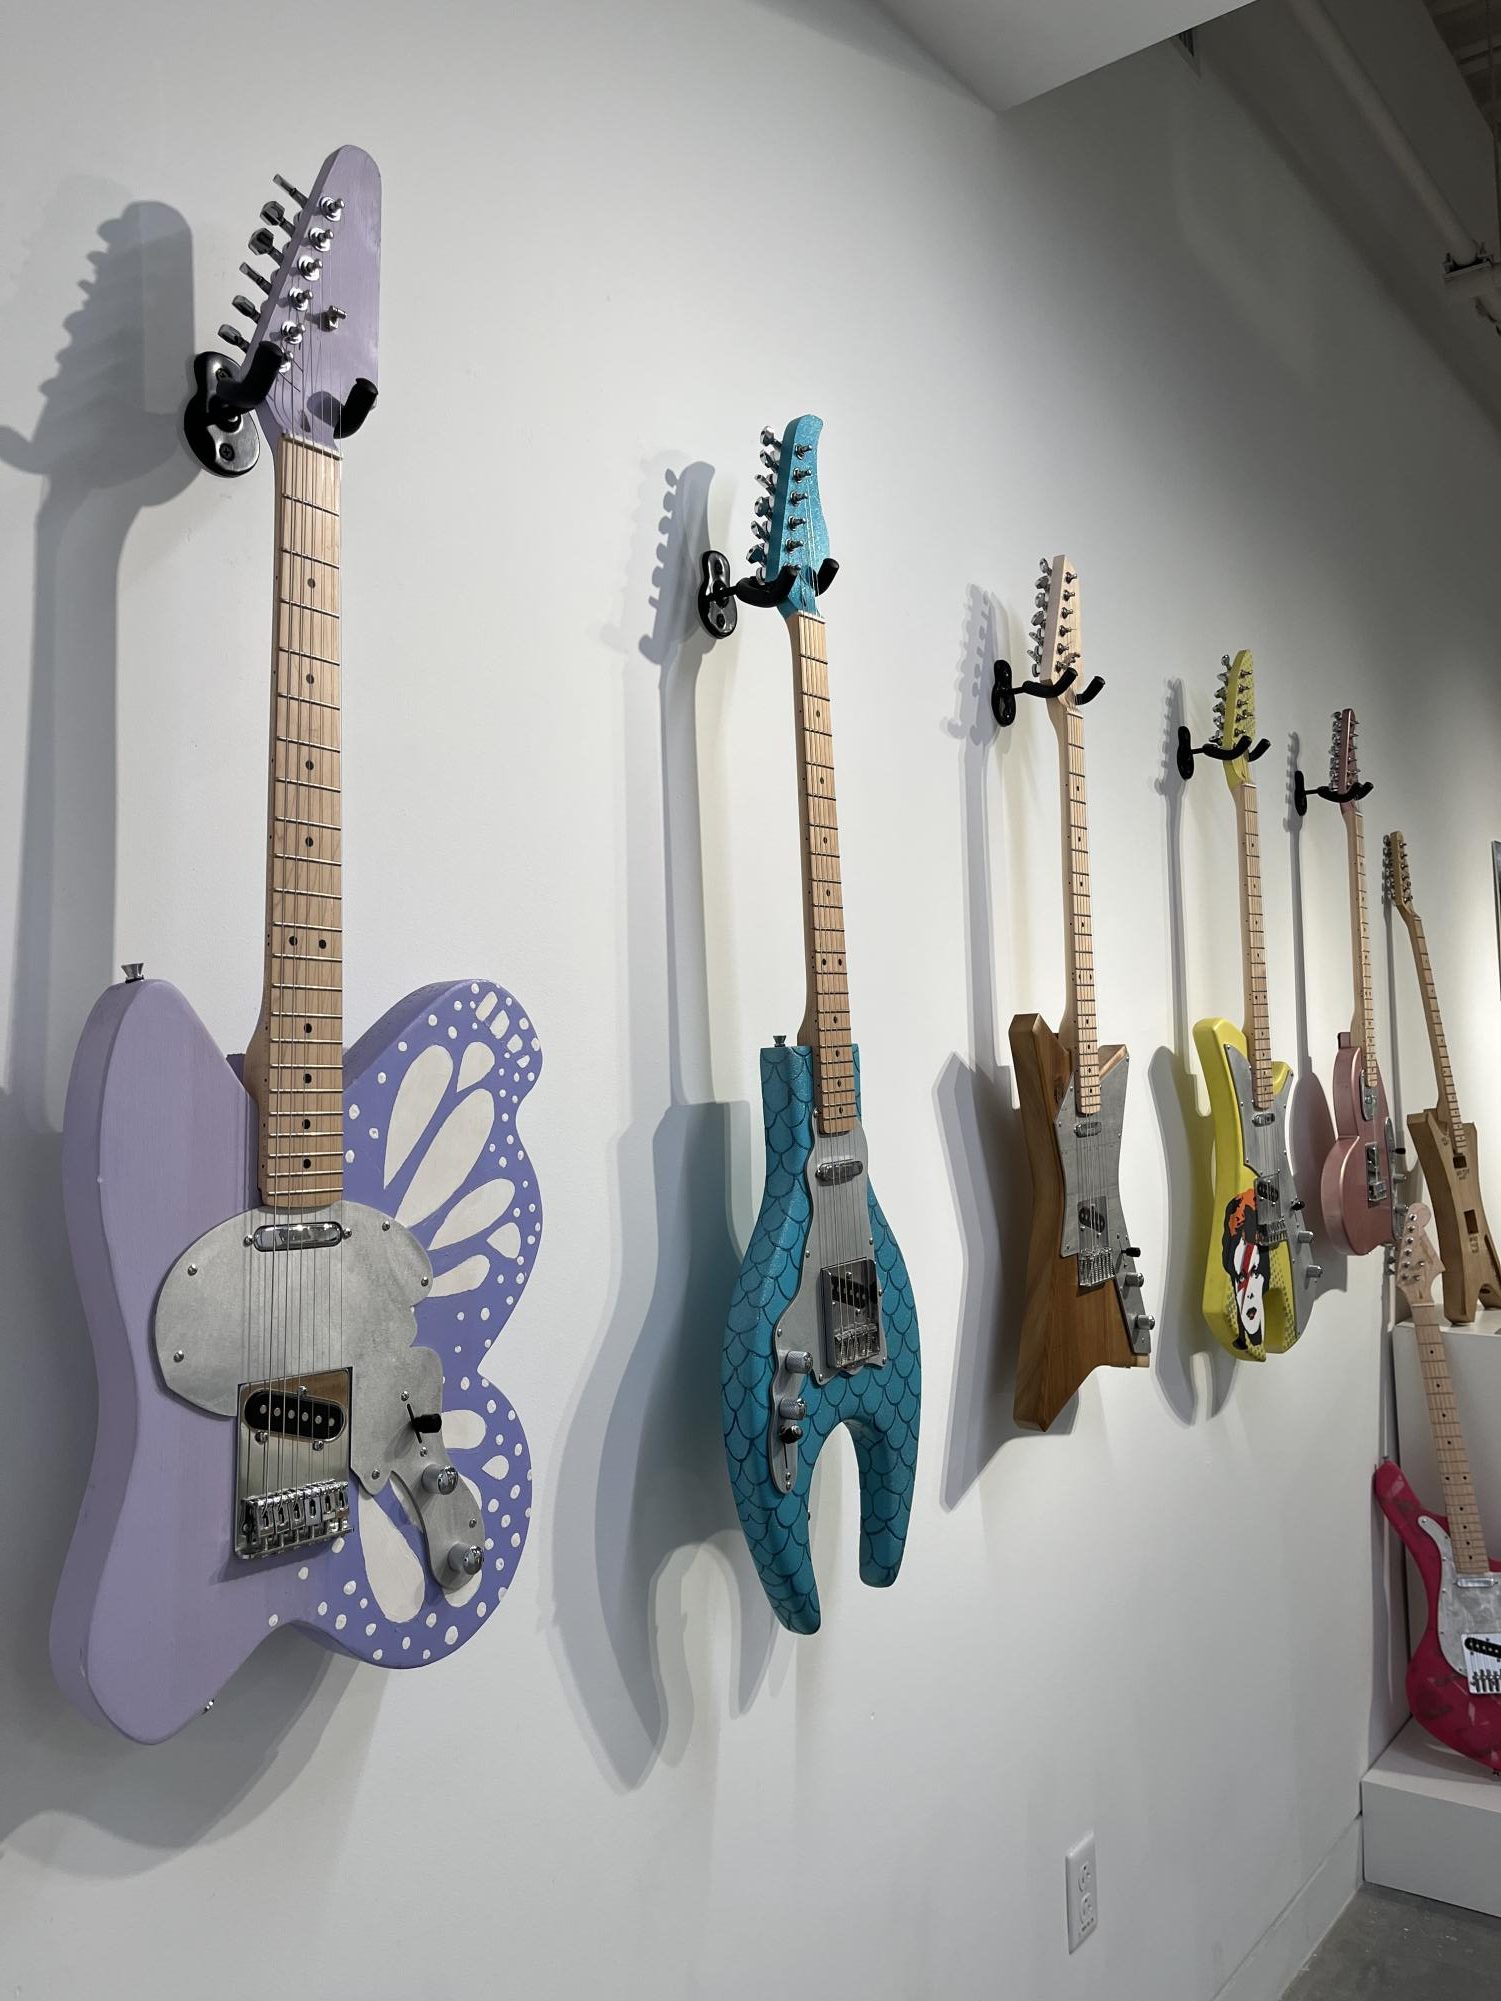 Attendees of the exhibit were met with this guitar display upon entering the gallery. 
Photo courtesy of Amanda Simons, STEAM faculty